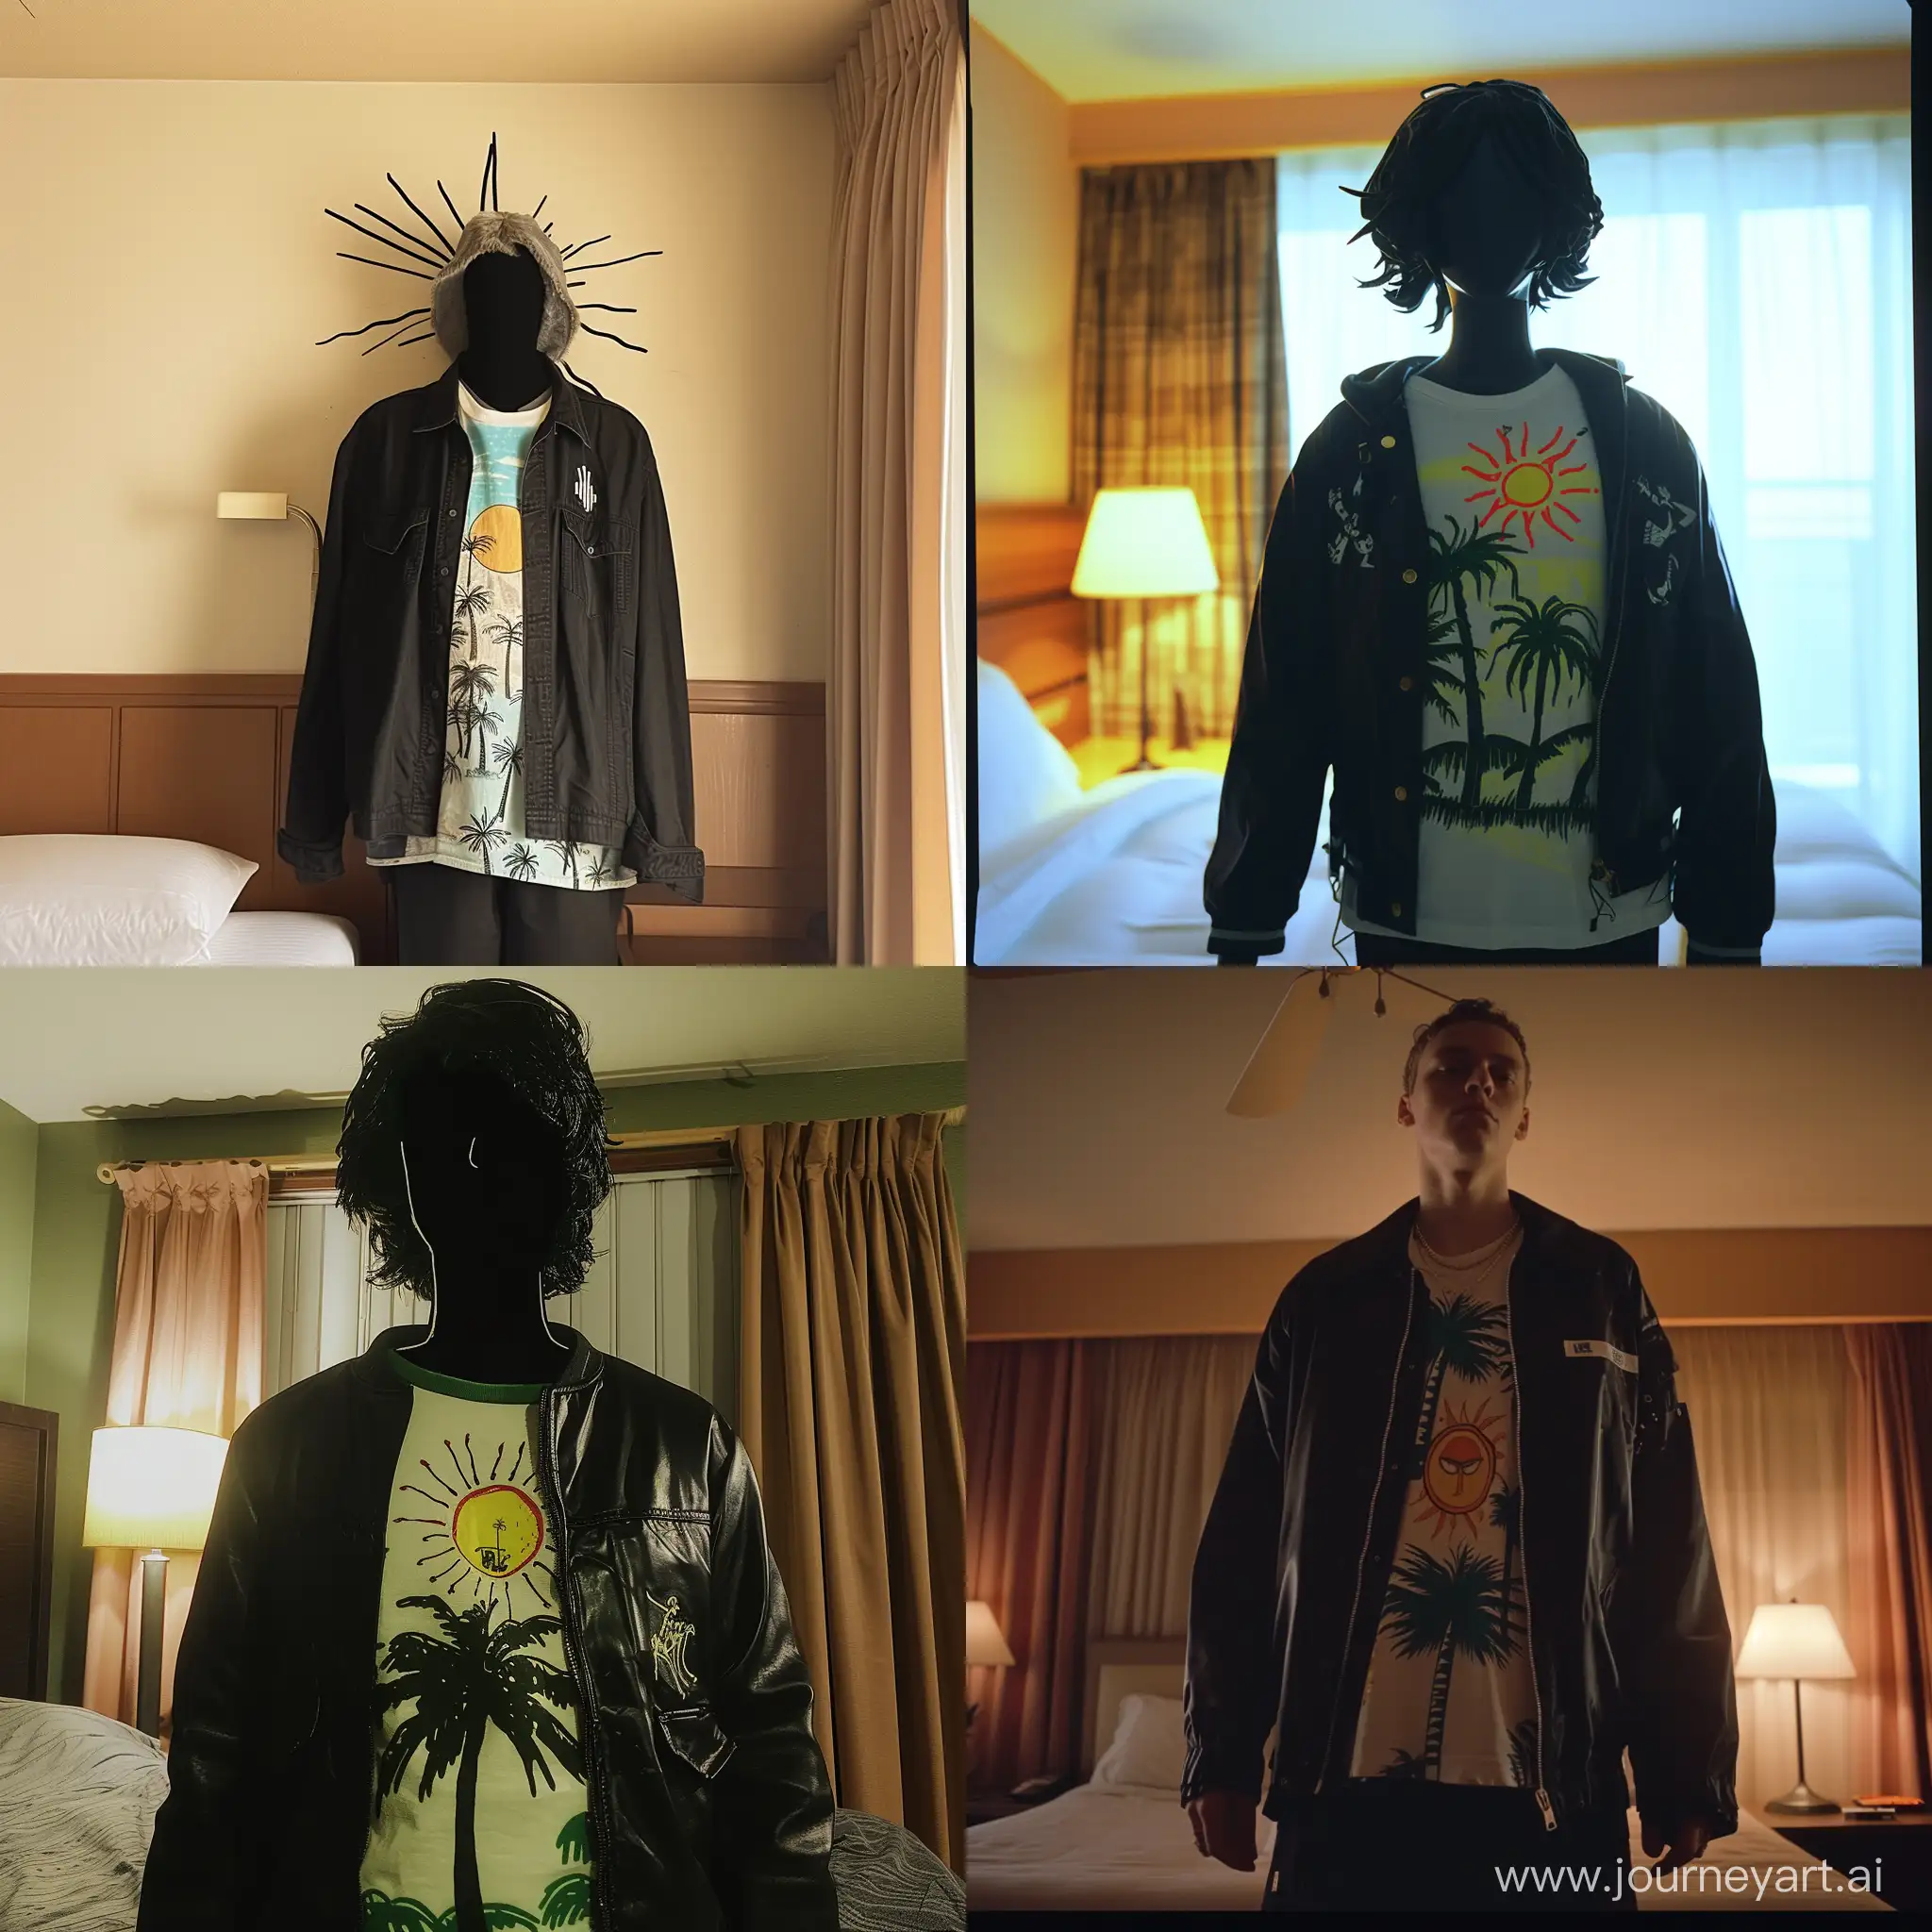 Person-in-Black-Jacket-with-Palm-Tree-Shirt-in-Modest-Hotel-Room